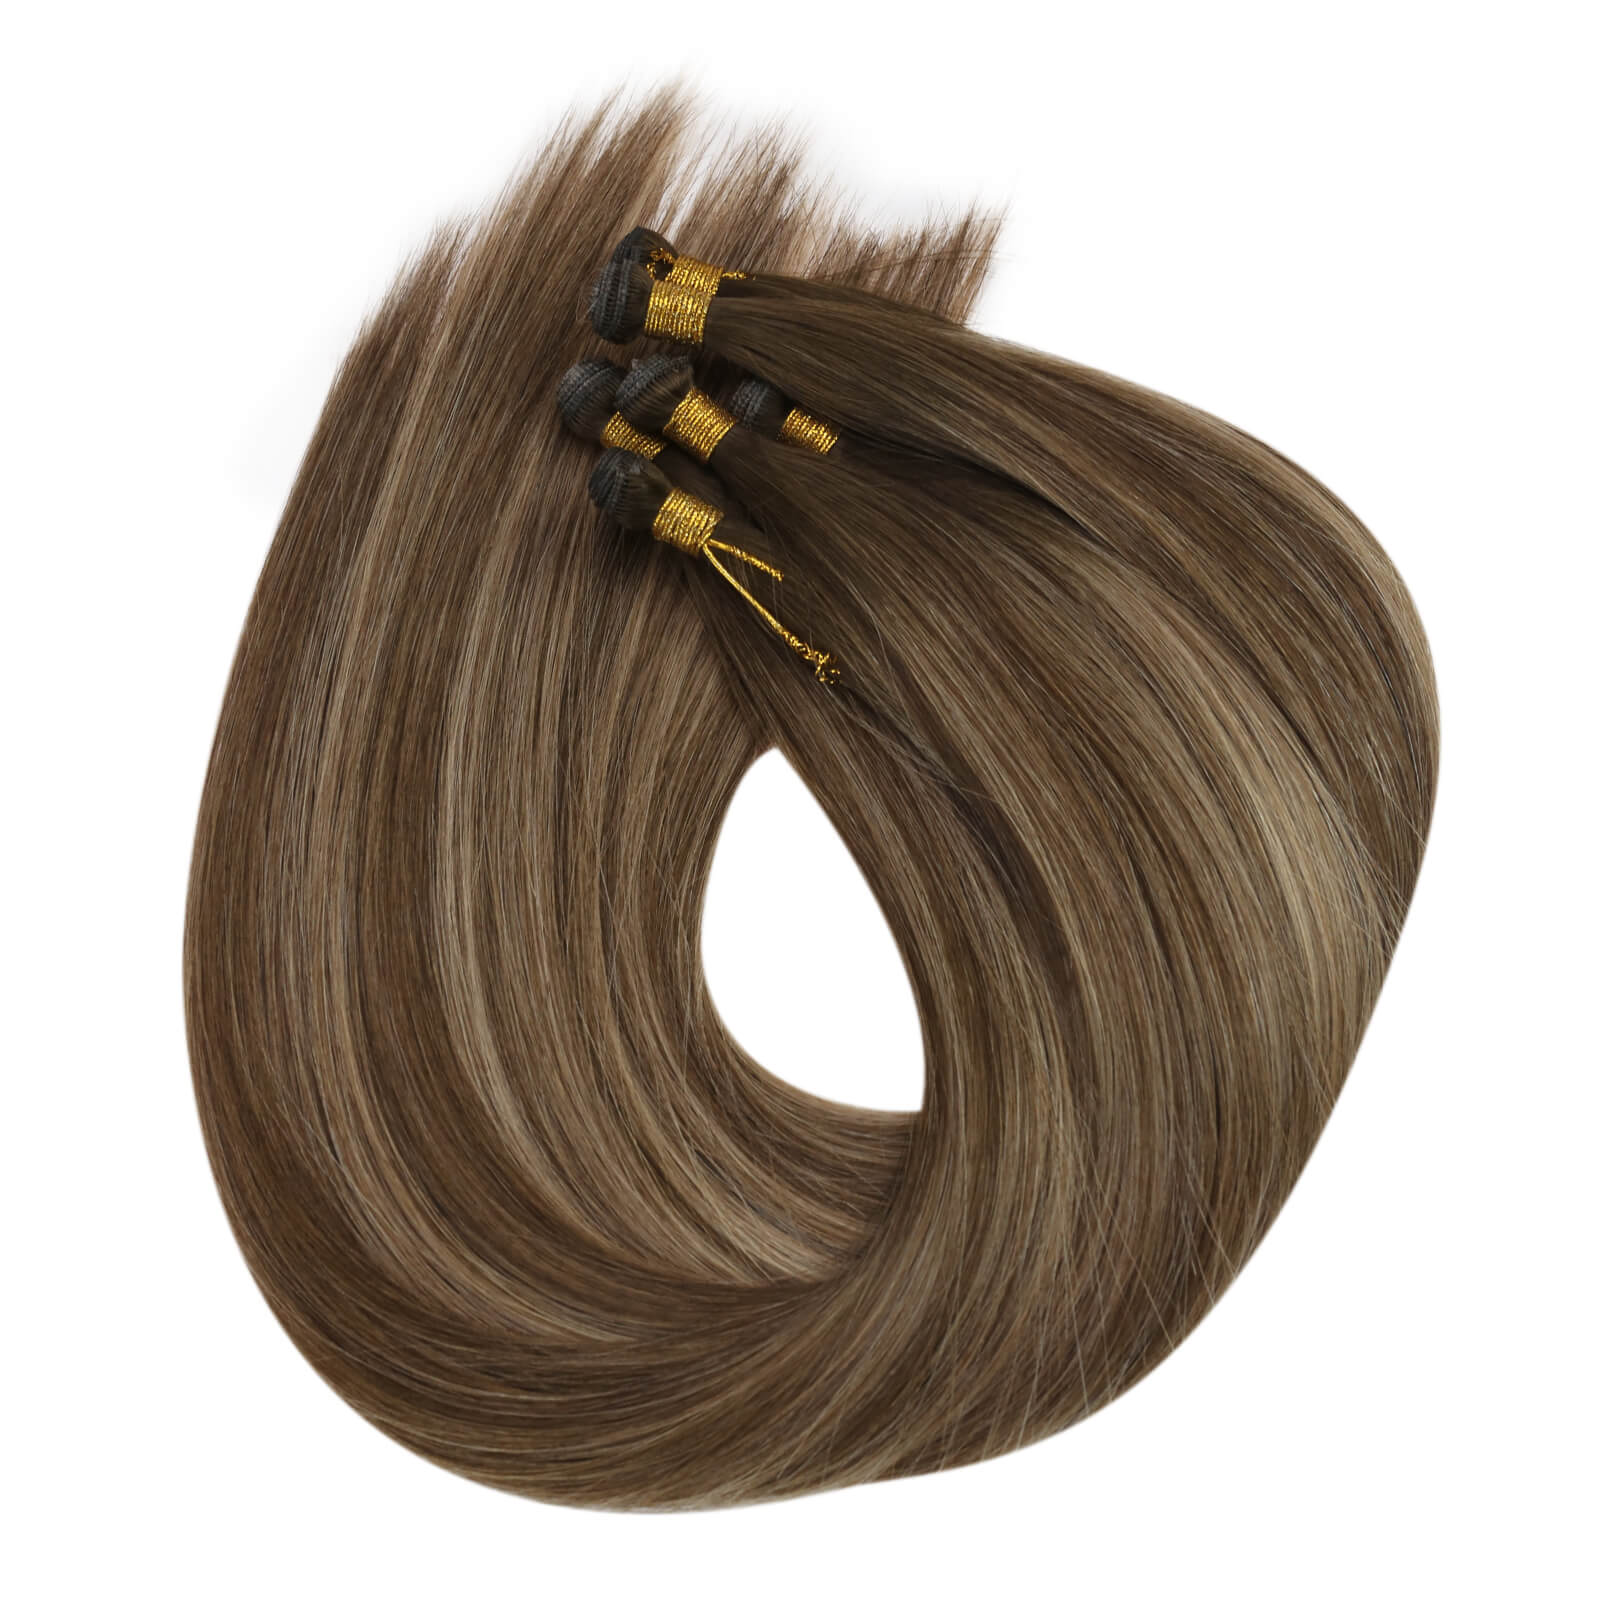 invisible genius weft hair extensions